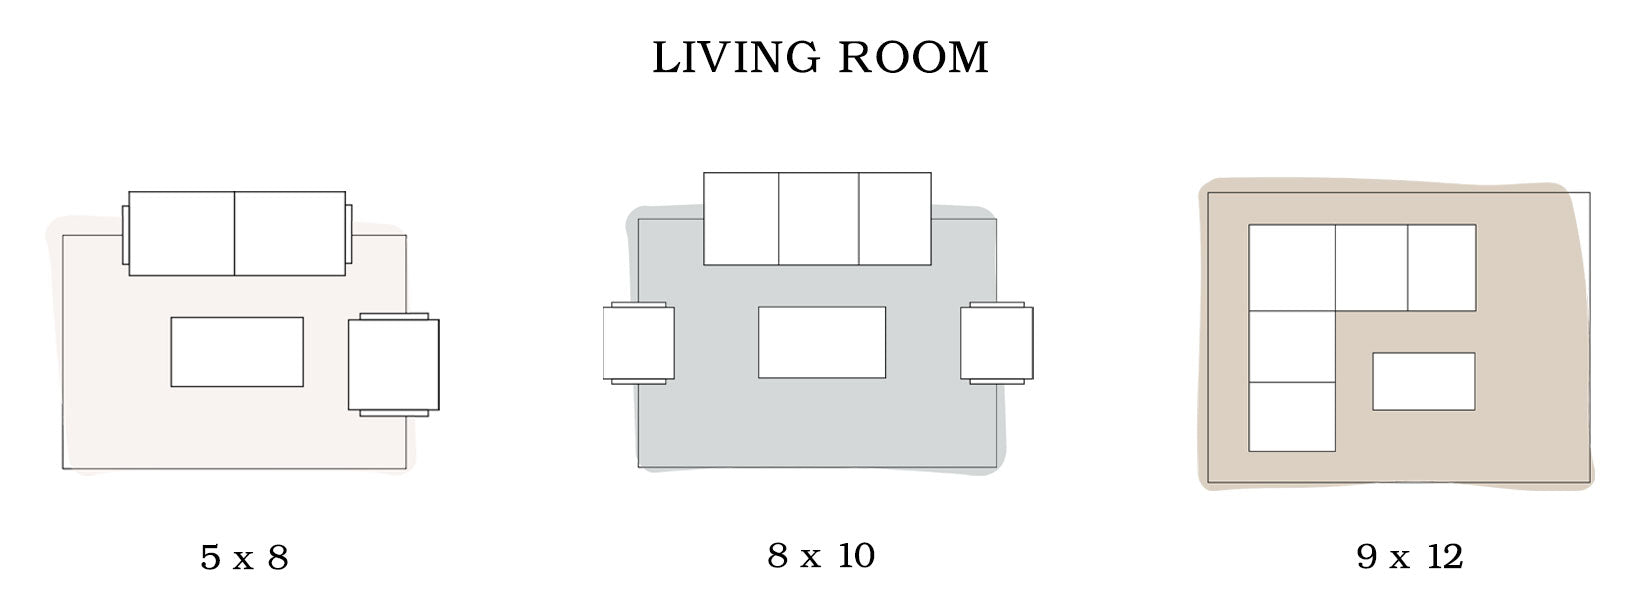 Living Room Area Rug Sizing